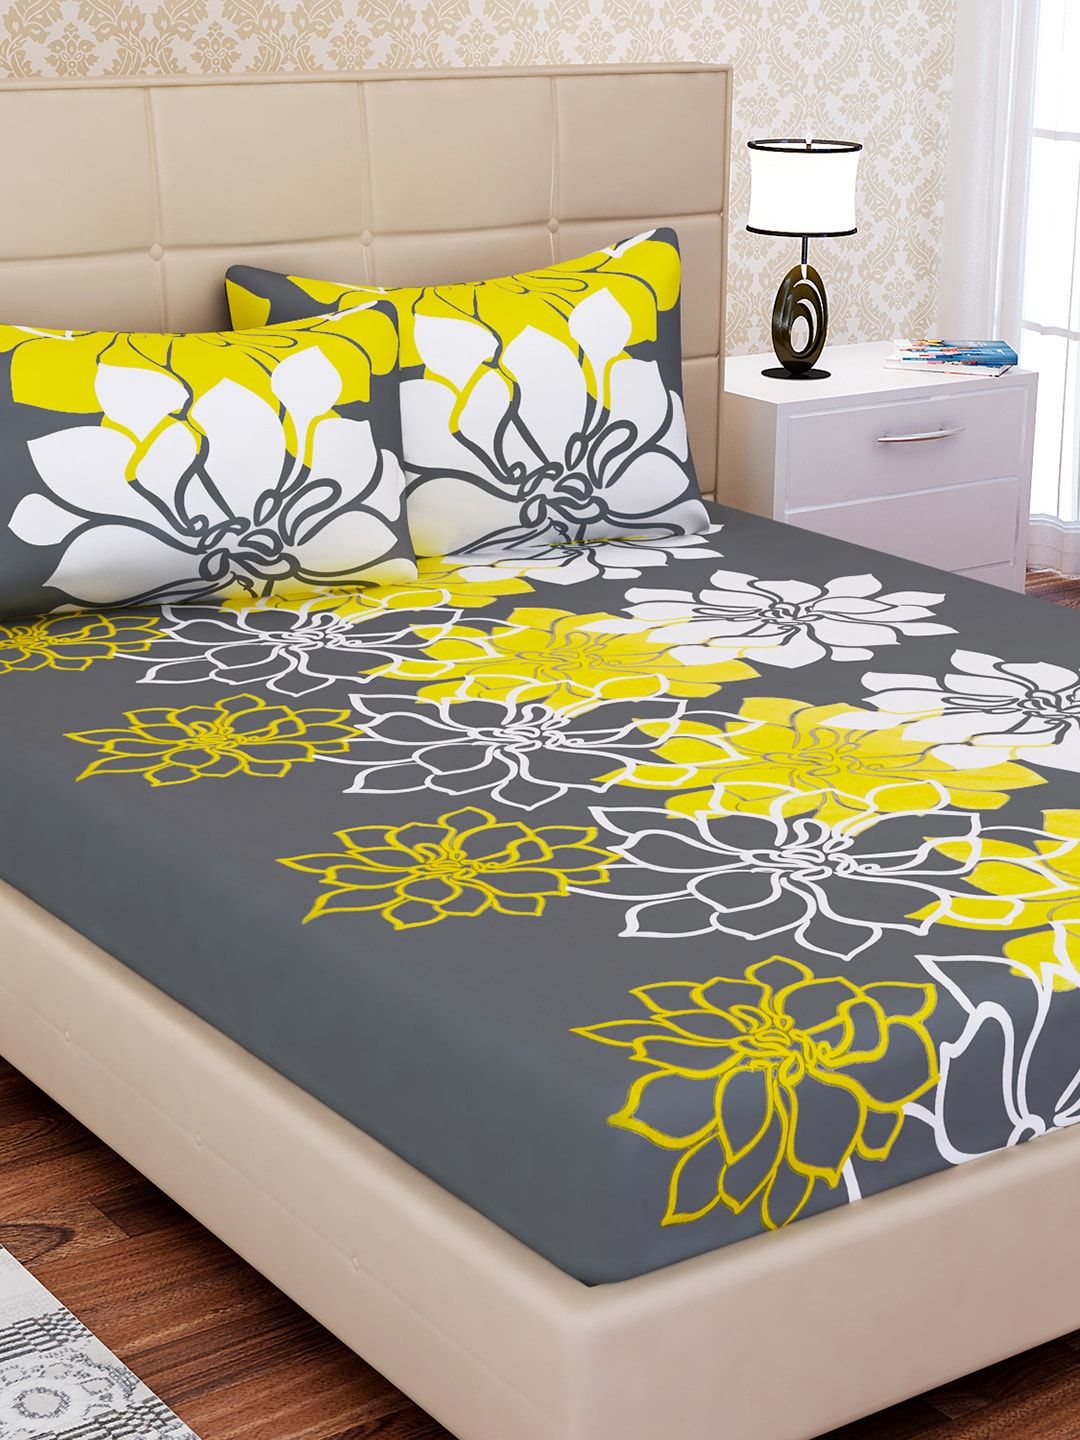 SEJ by Nisha Gupta Grey & Yellow Floral 144 TC Cotton 1 King Bedsheet with 2 Pillow Covers Price in India